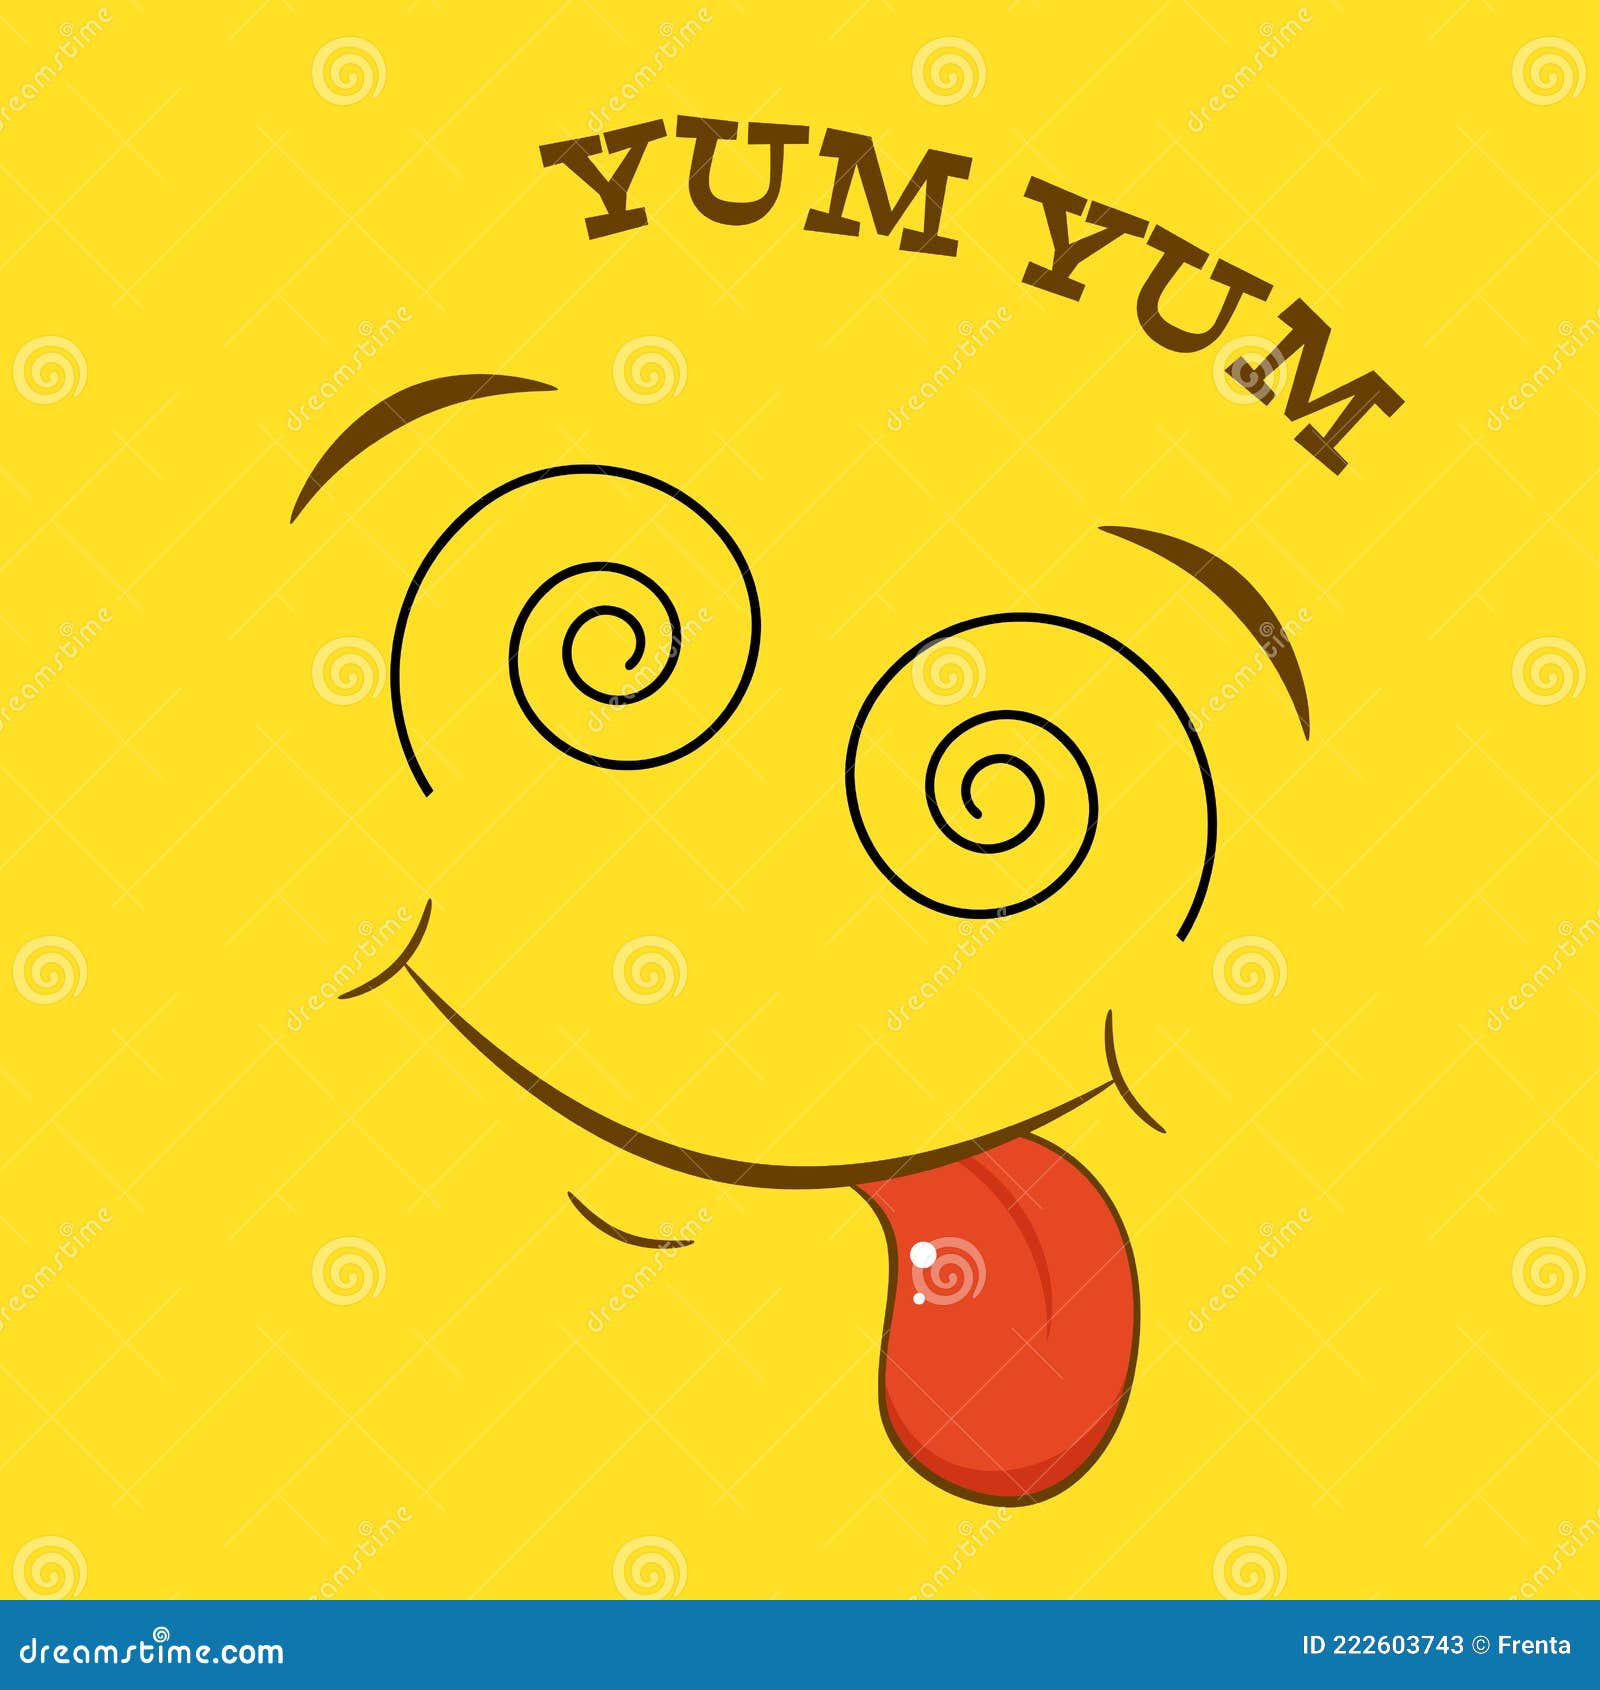 Smiling Yummy Emoticon on Yellow Background Stock Vector